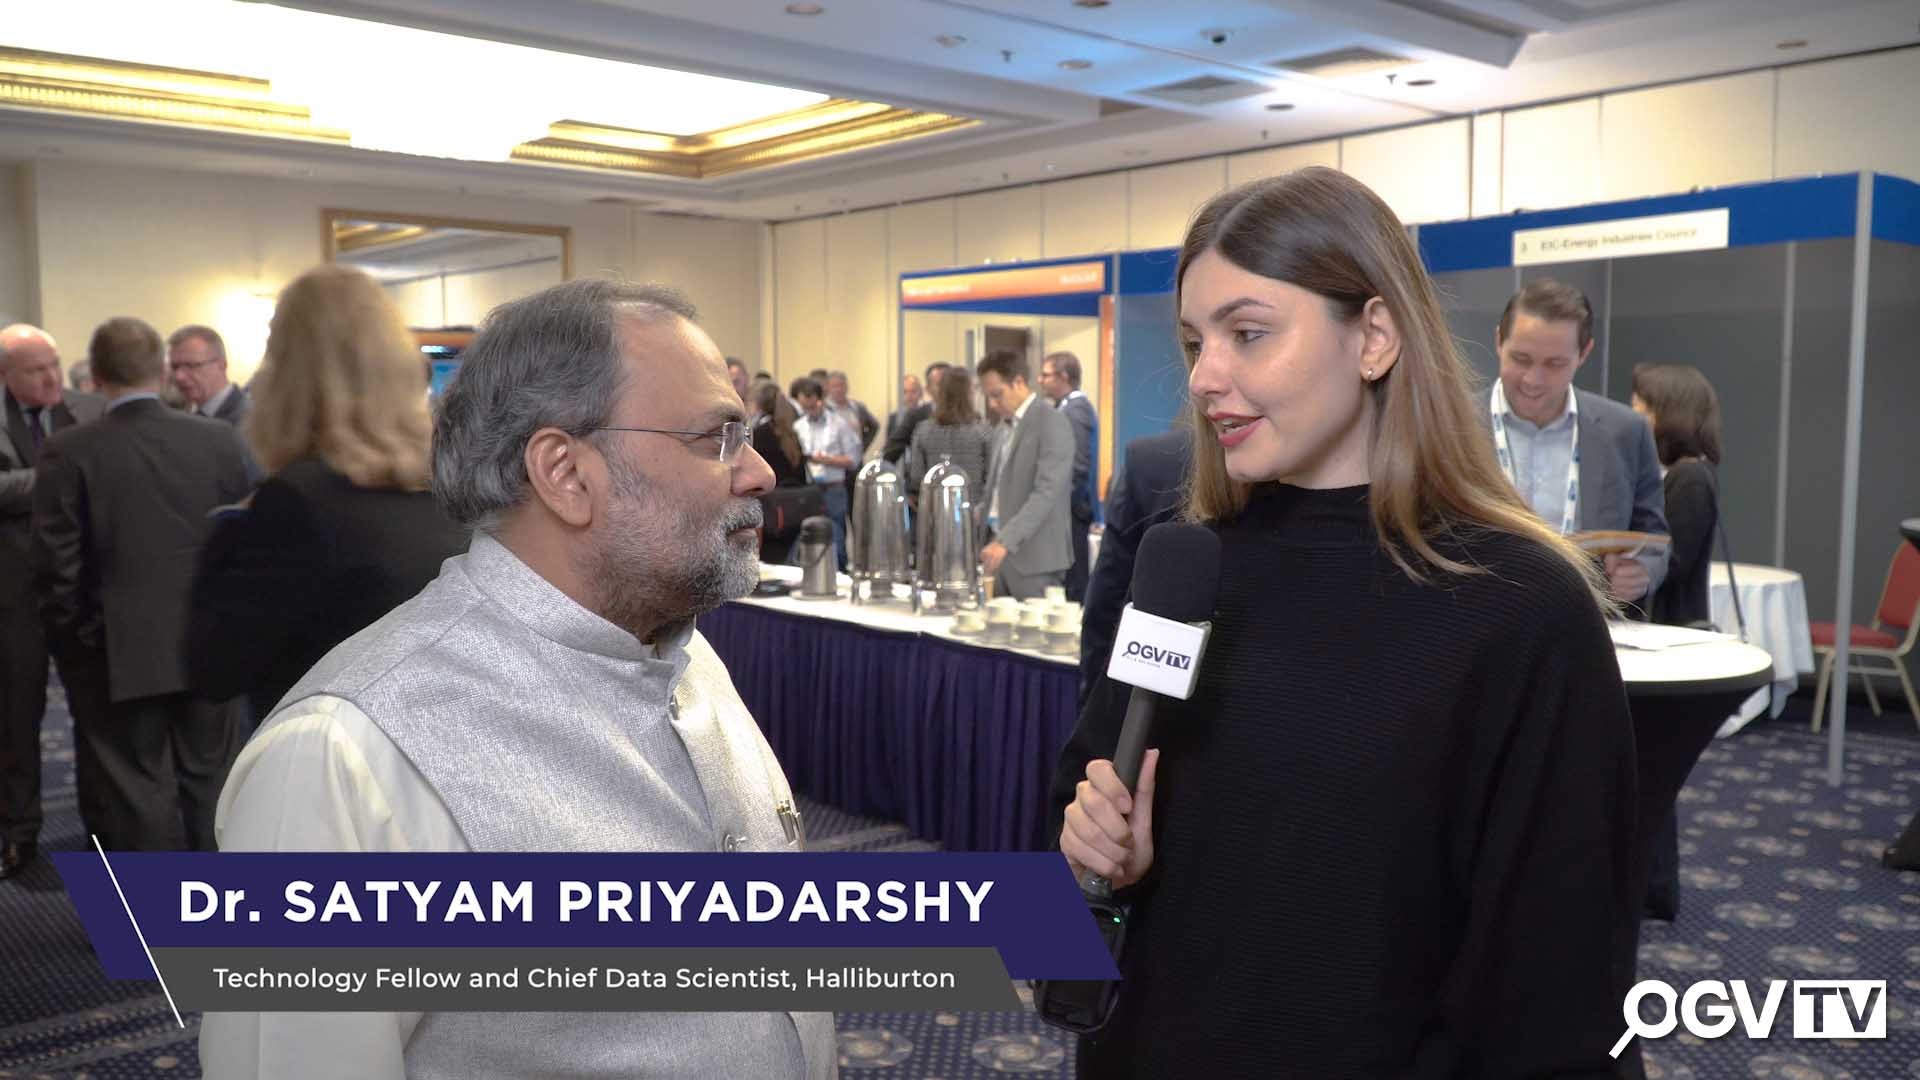 Future Downstream 2019 - "Data is an Asset" - Interview with Dr. Satyam from HALLIBURTON